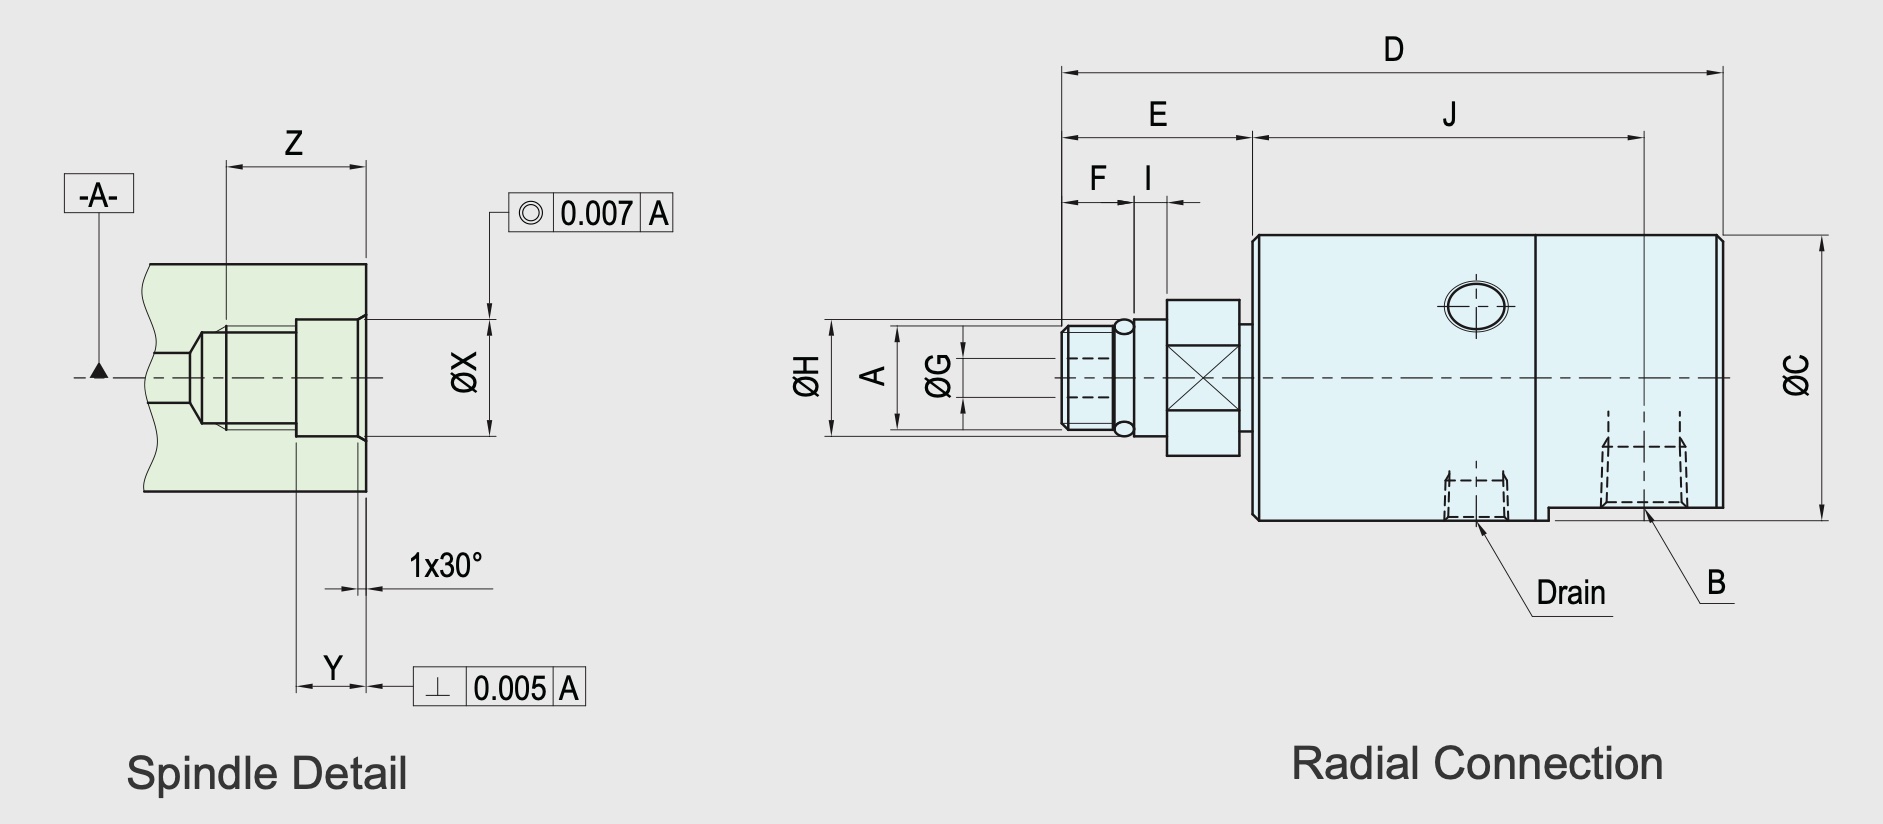 SRJ01-202-Radial Technical Drawing Integrated radial type Rotating Union-Rotary Joint for Coolant and Oil with Dry Running